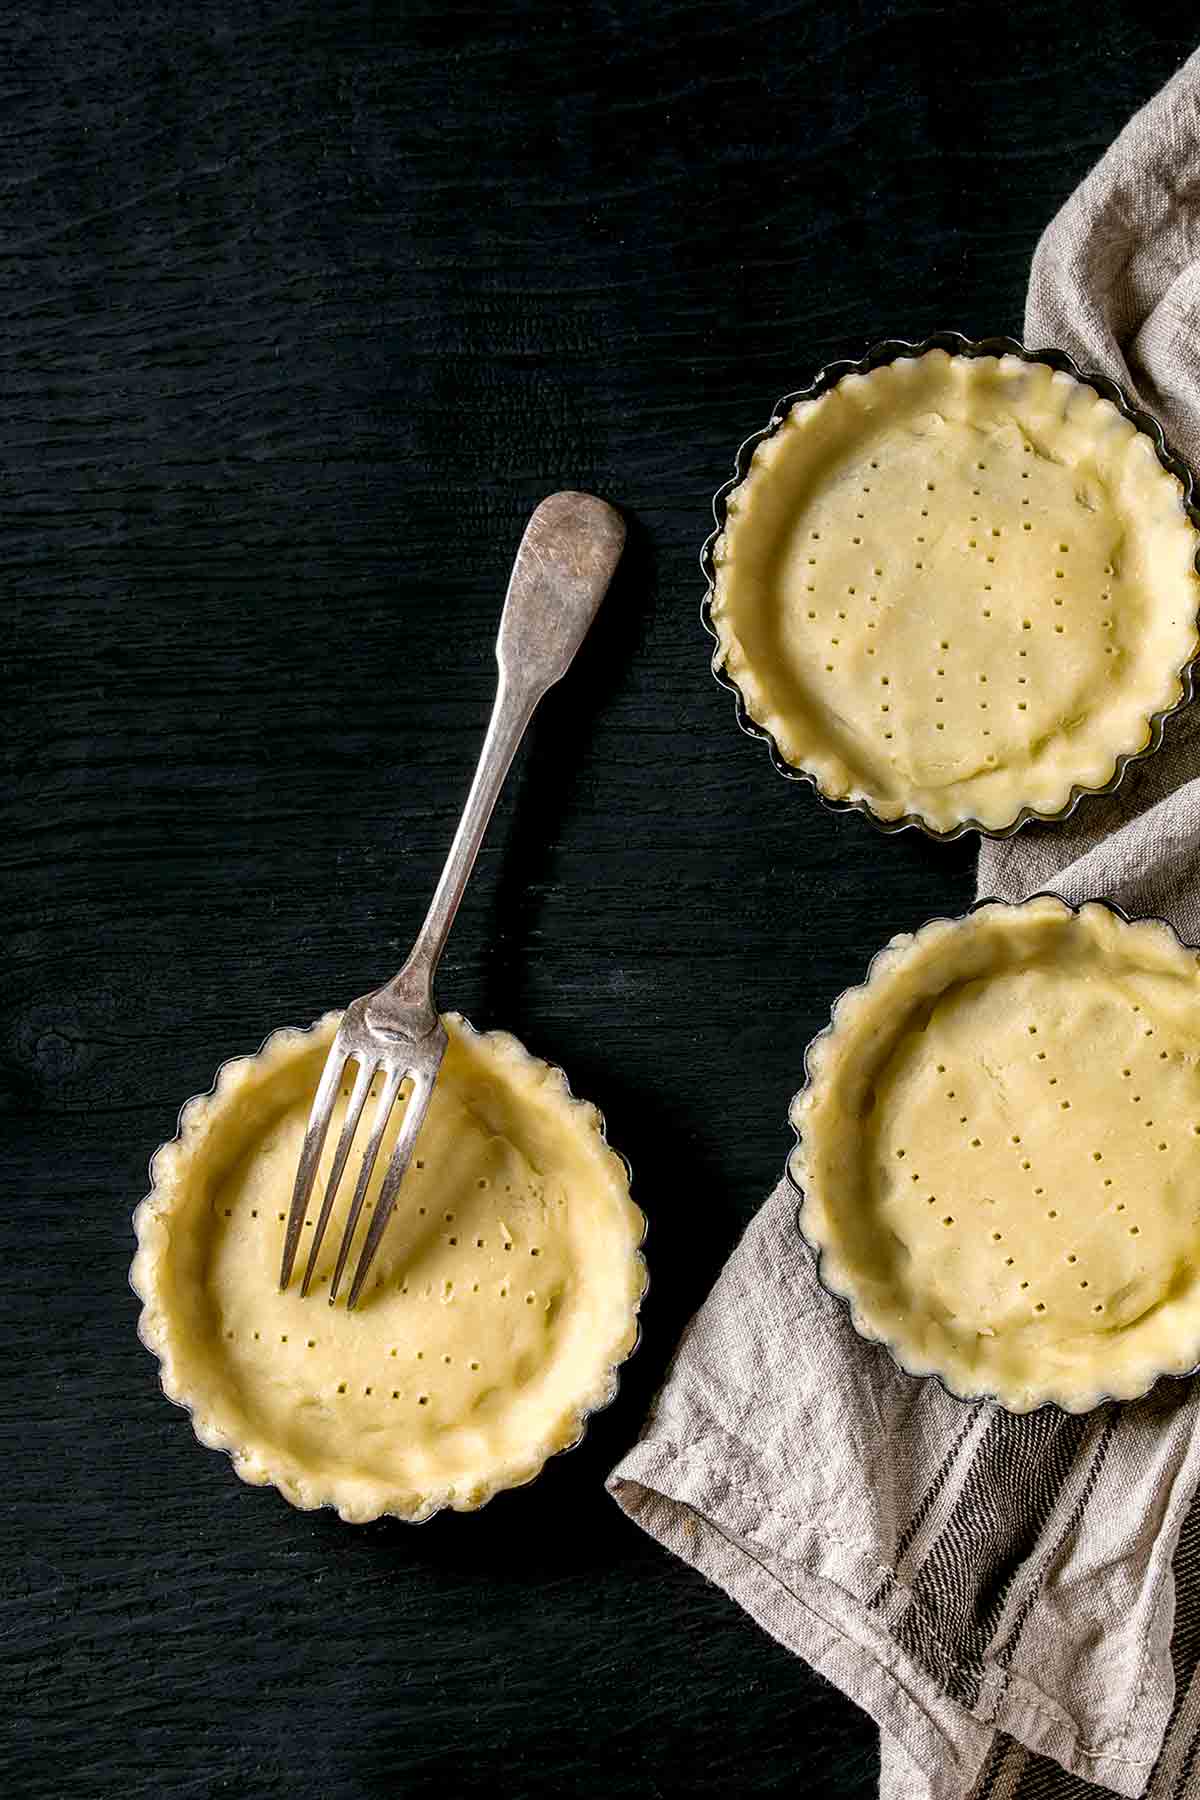 Three small pie shells that have been pricked with a fork with a fork resting in one of them.